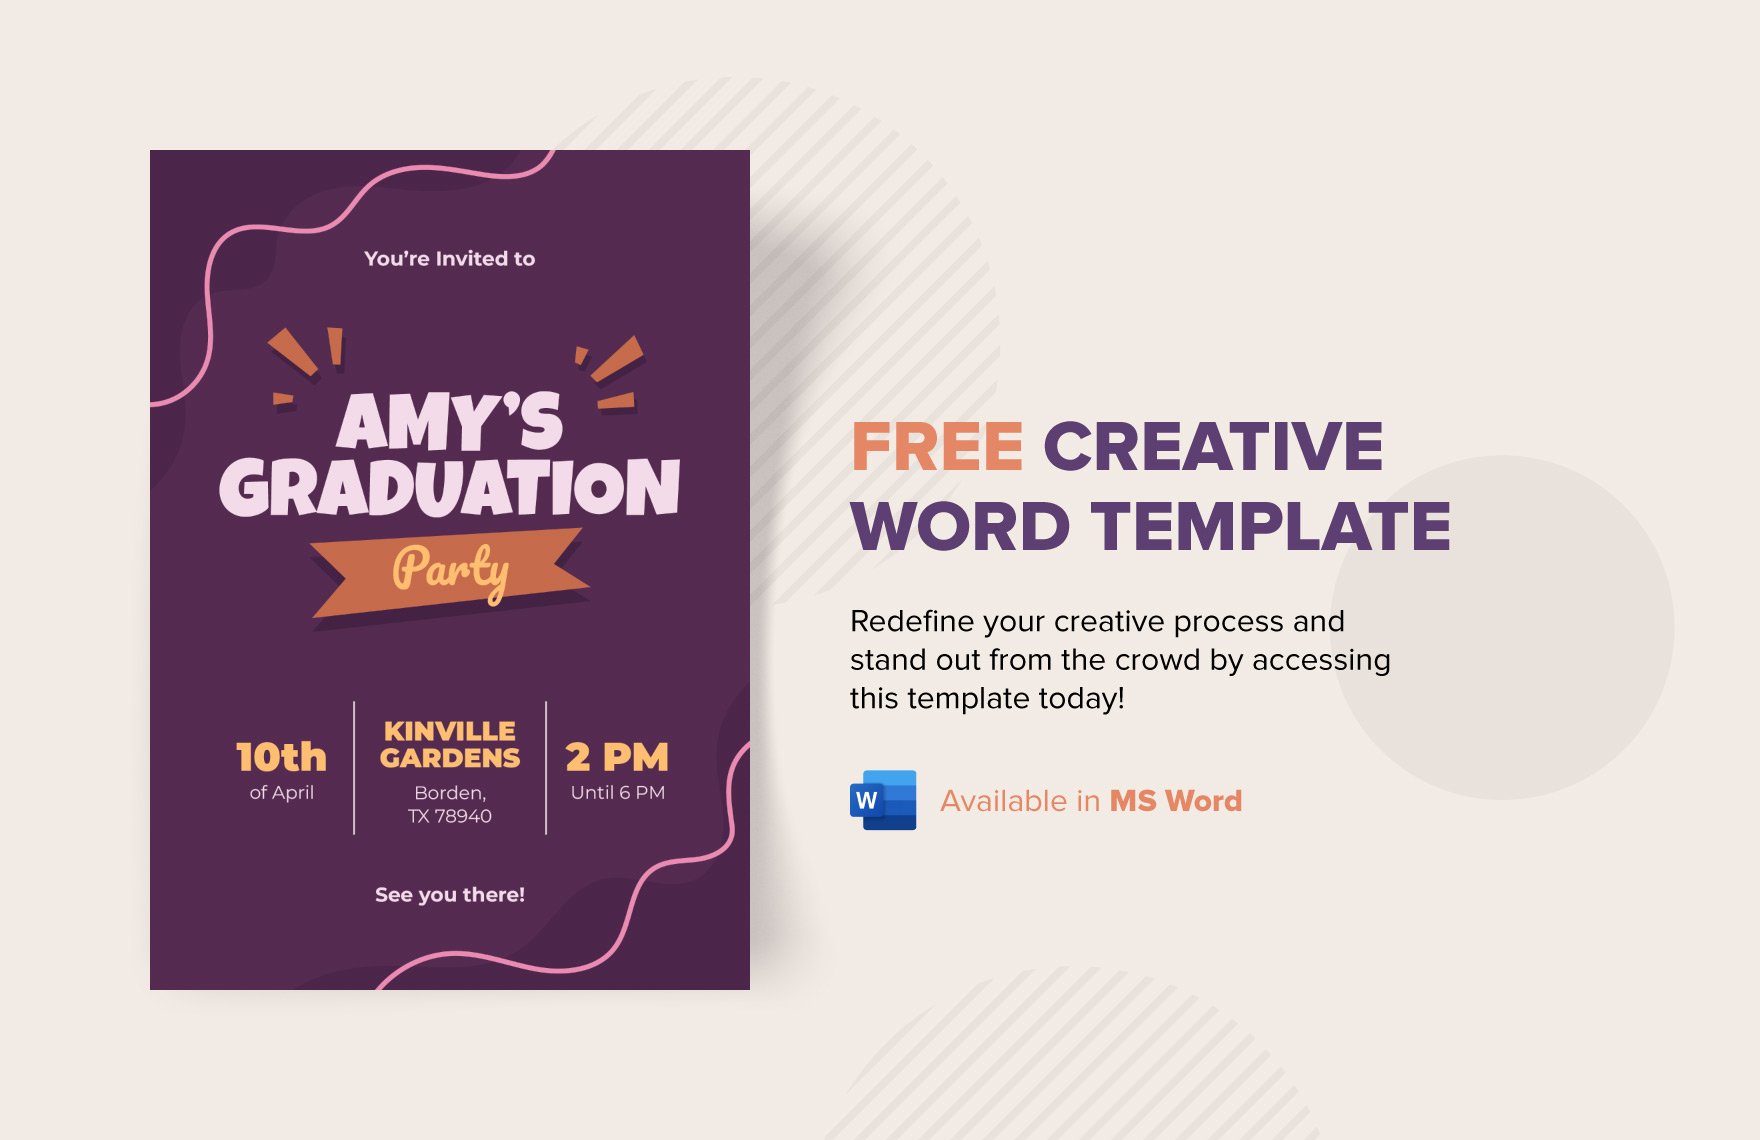 Free Creative Word Template in Word